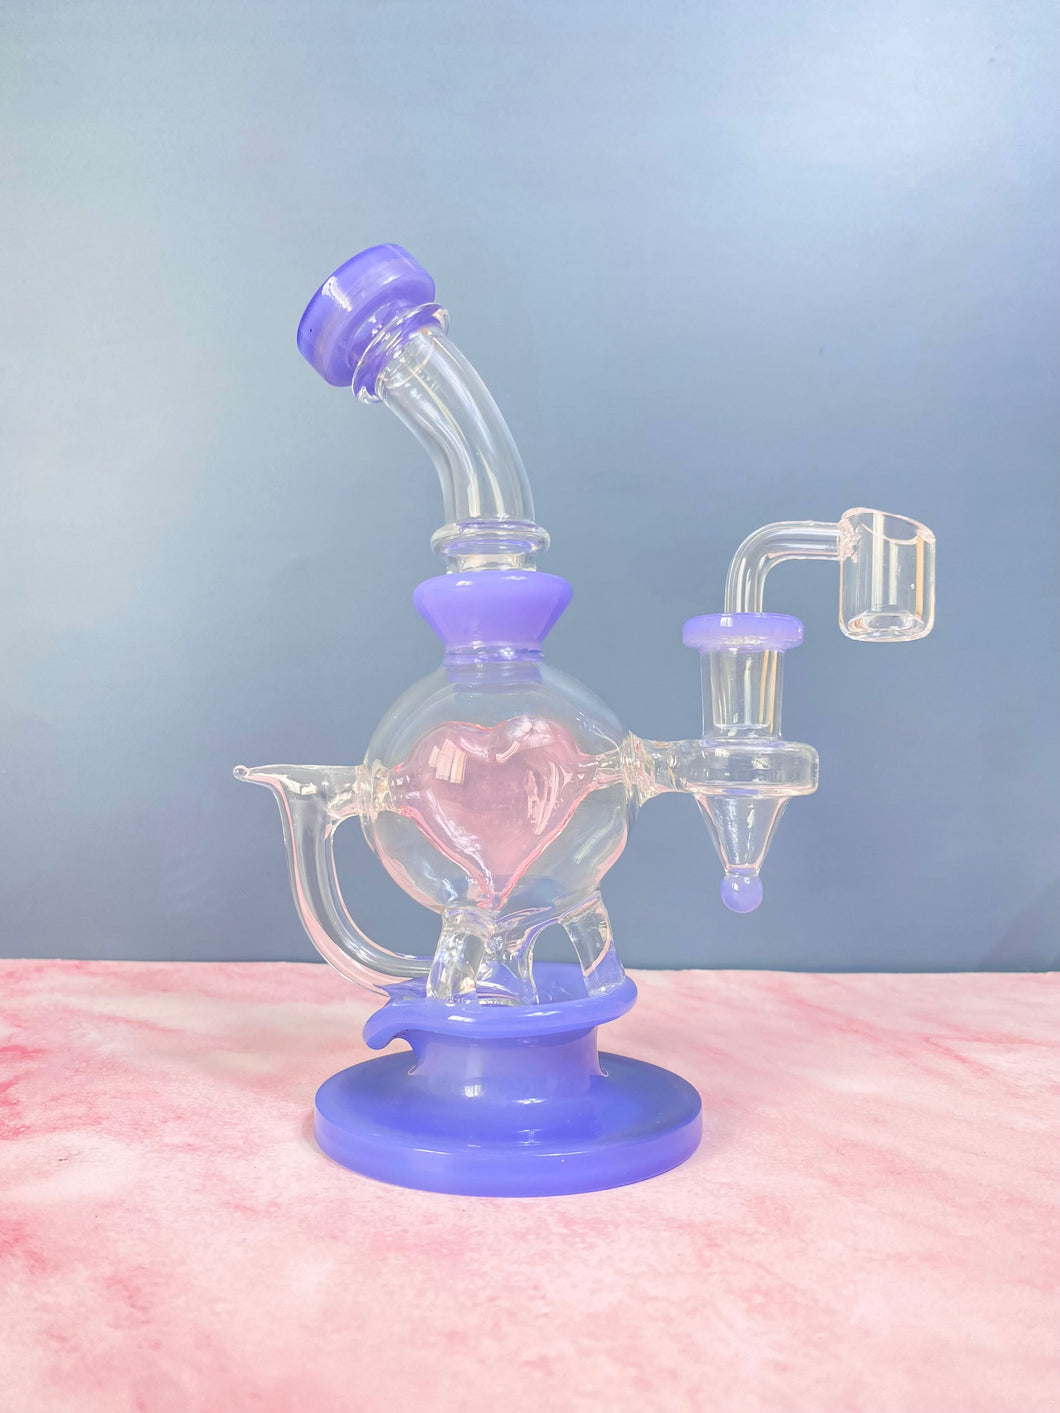 Ball Rig with Translucent Pink Heart